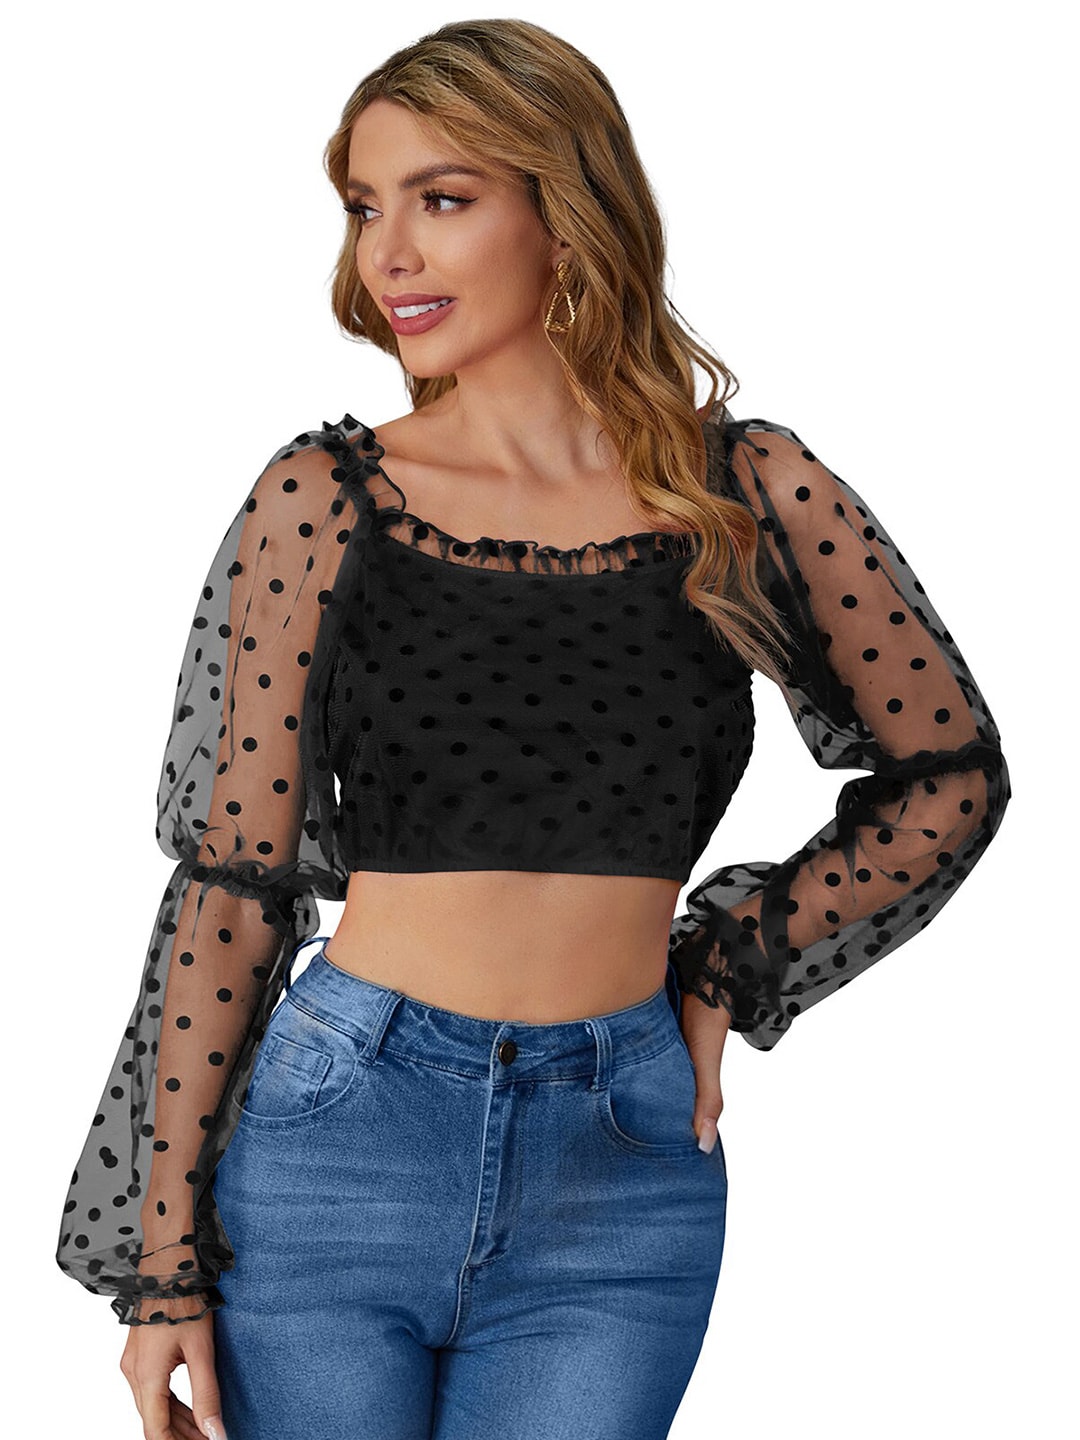 ODETTE Polka Dot Printed Square Neck Puff Sleeves Crop Top Price in India